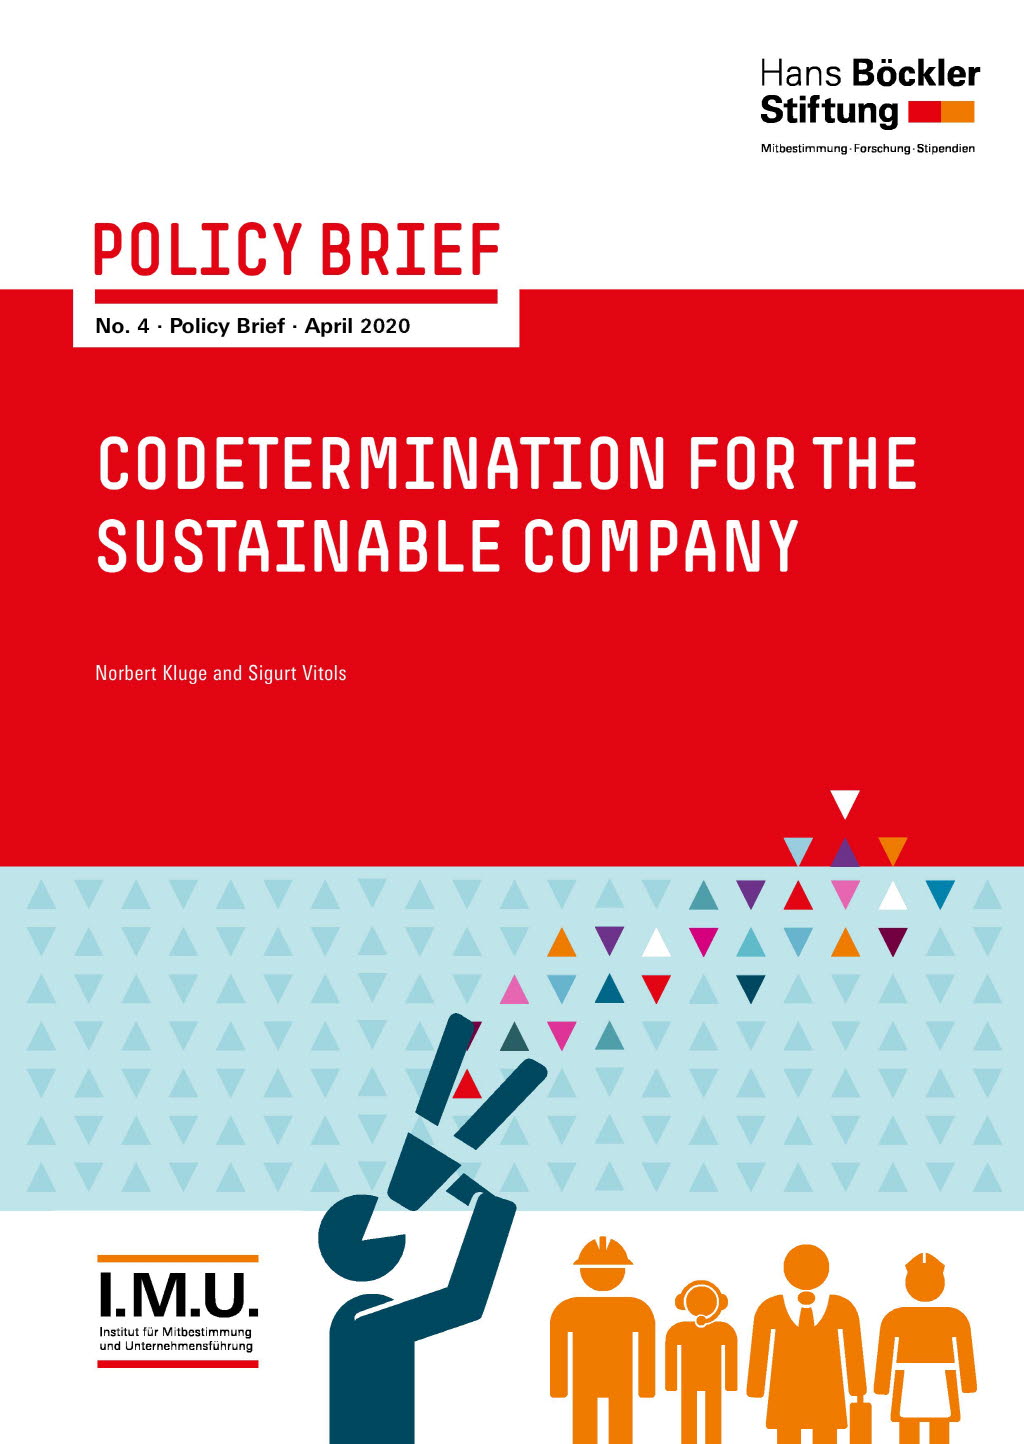 Codetermination for the sustainable company